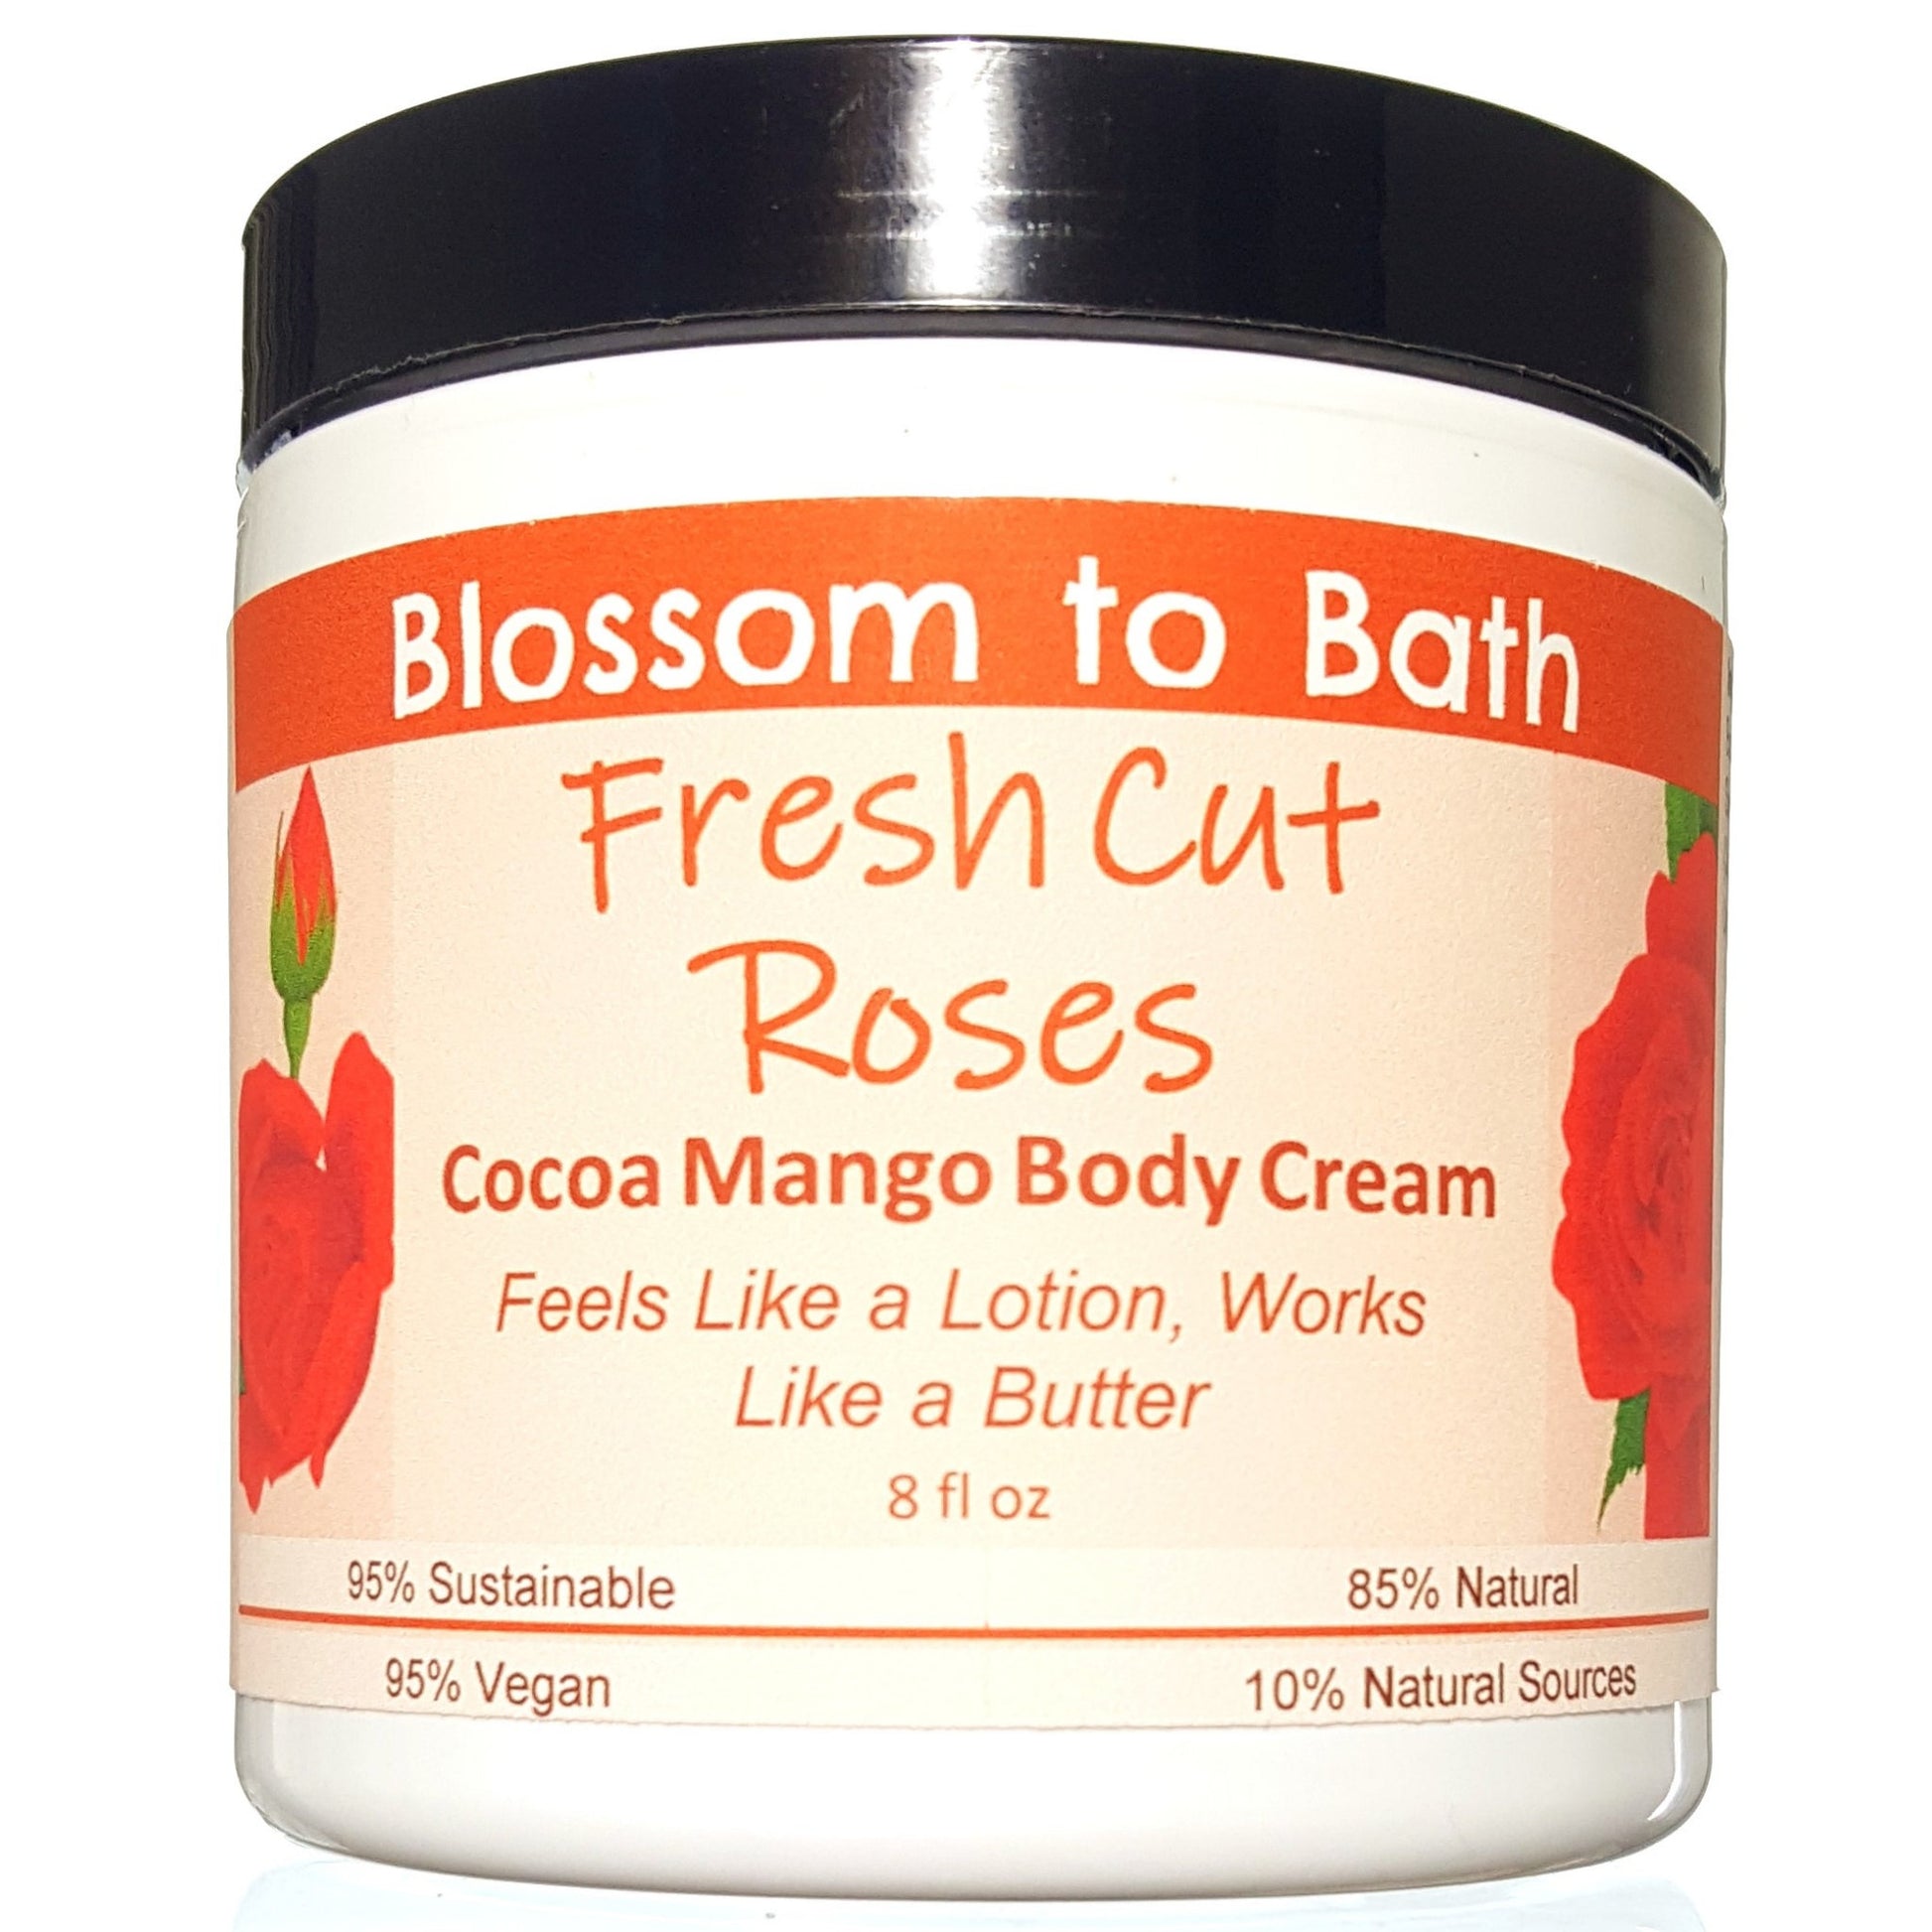 Buy Blossom to Bath Fresh Cut Roses Cocoa Mango Body Cream from Flowersong Soap Studio.  Rich organic butters  soften and moisturize even the roughest skin all day  A true rose fragrance, the scent captures the splendor of a newly blossomed rose.